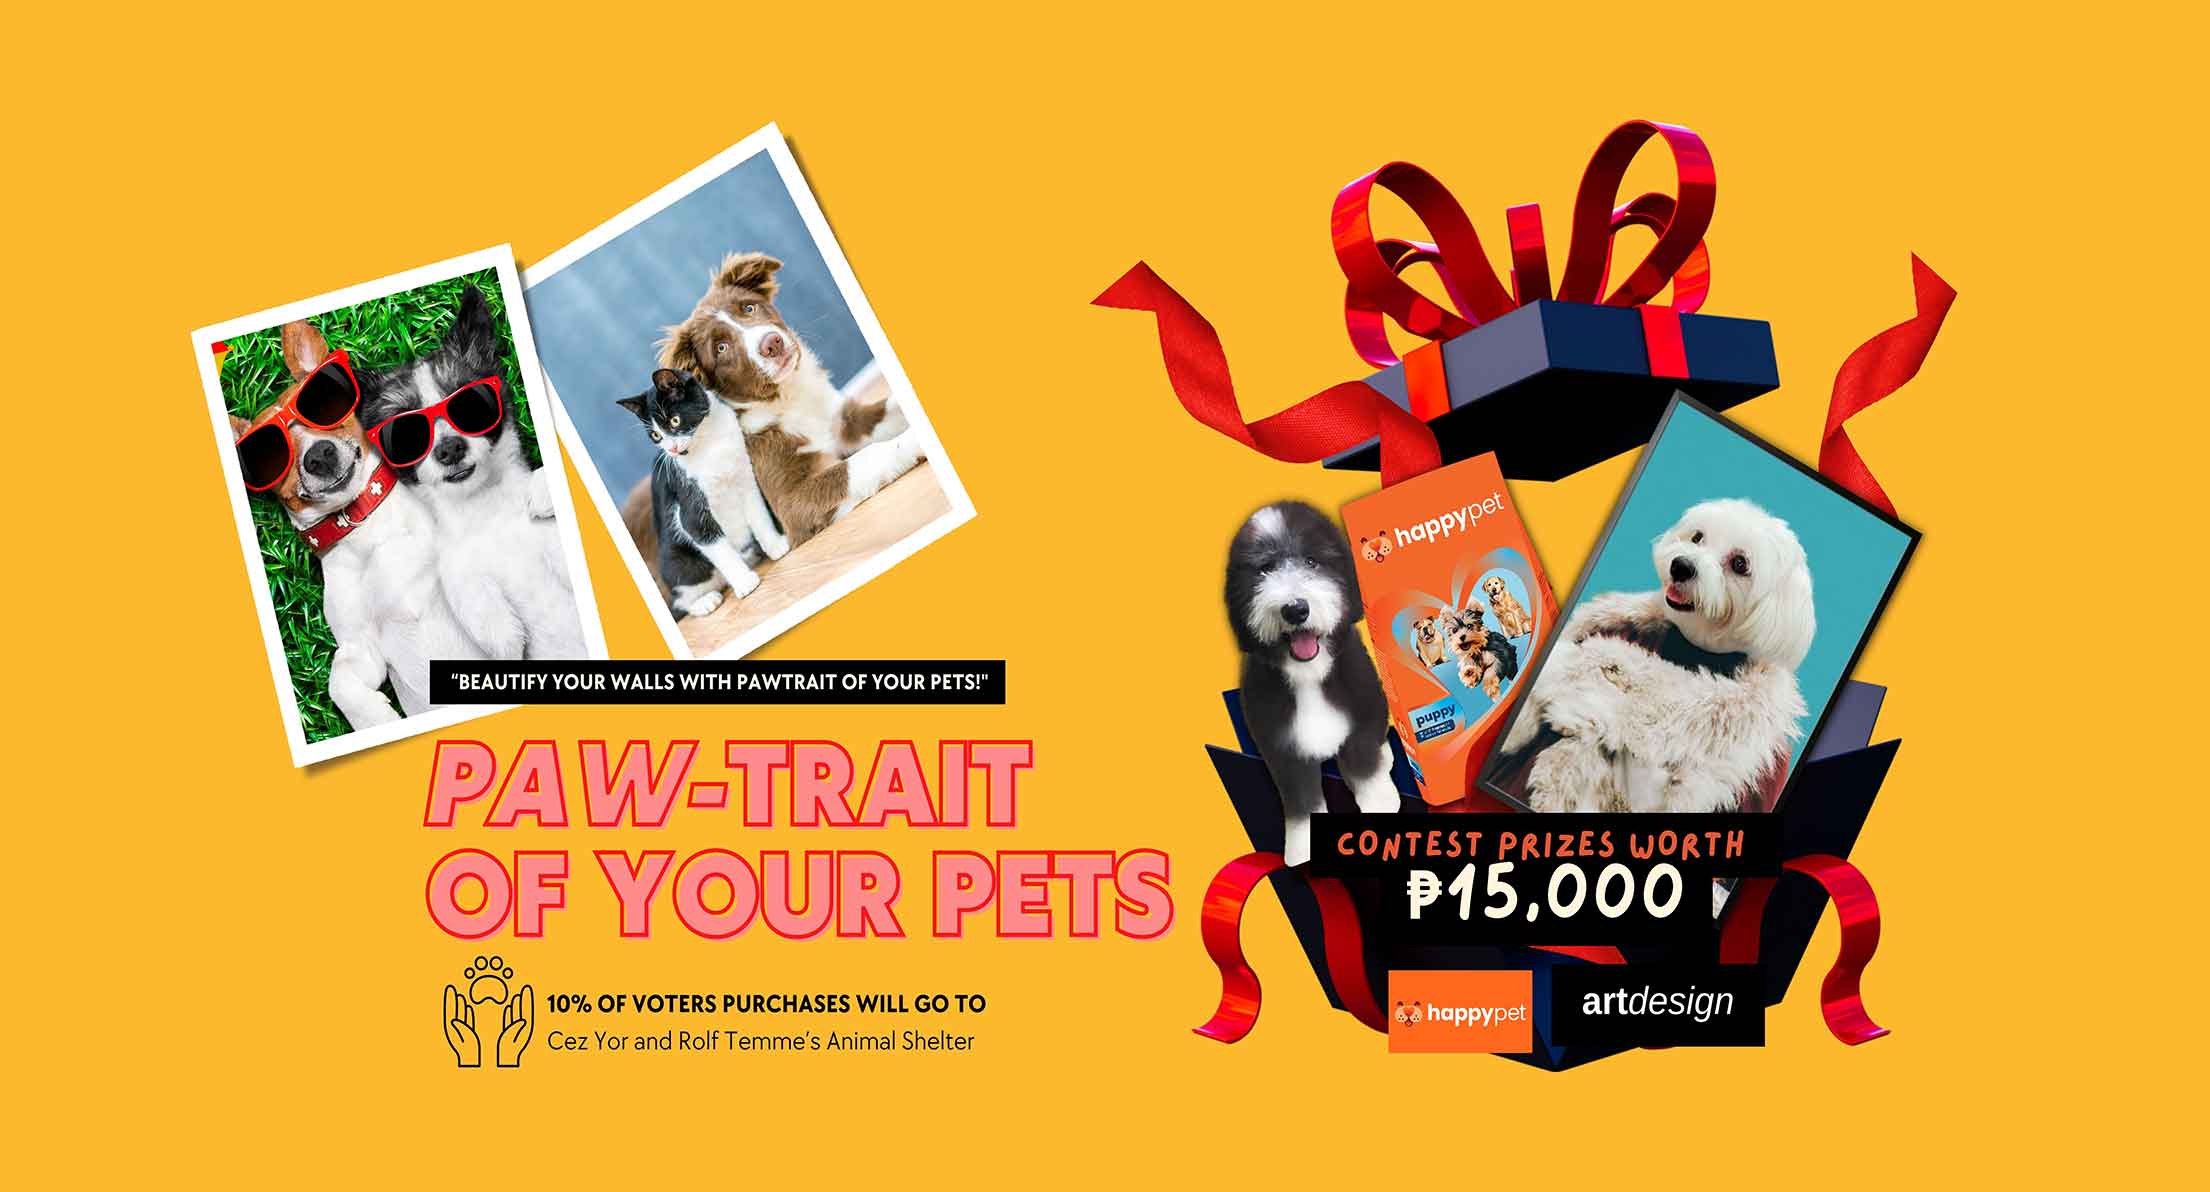 Photo competition for pets